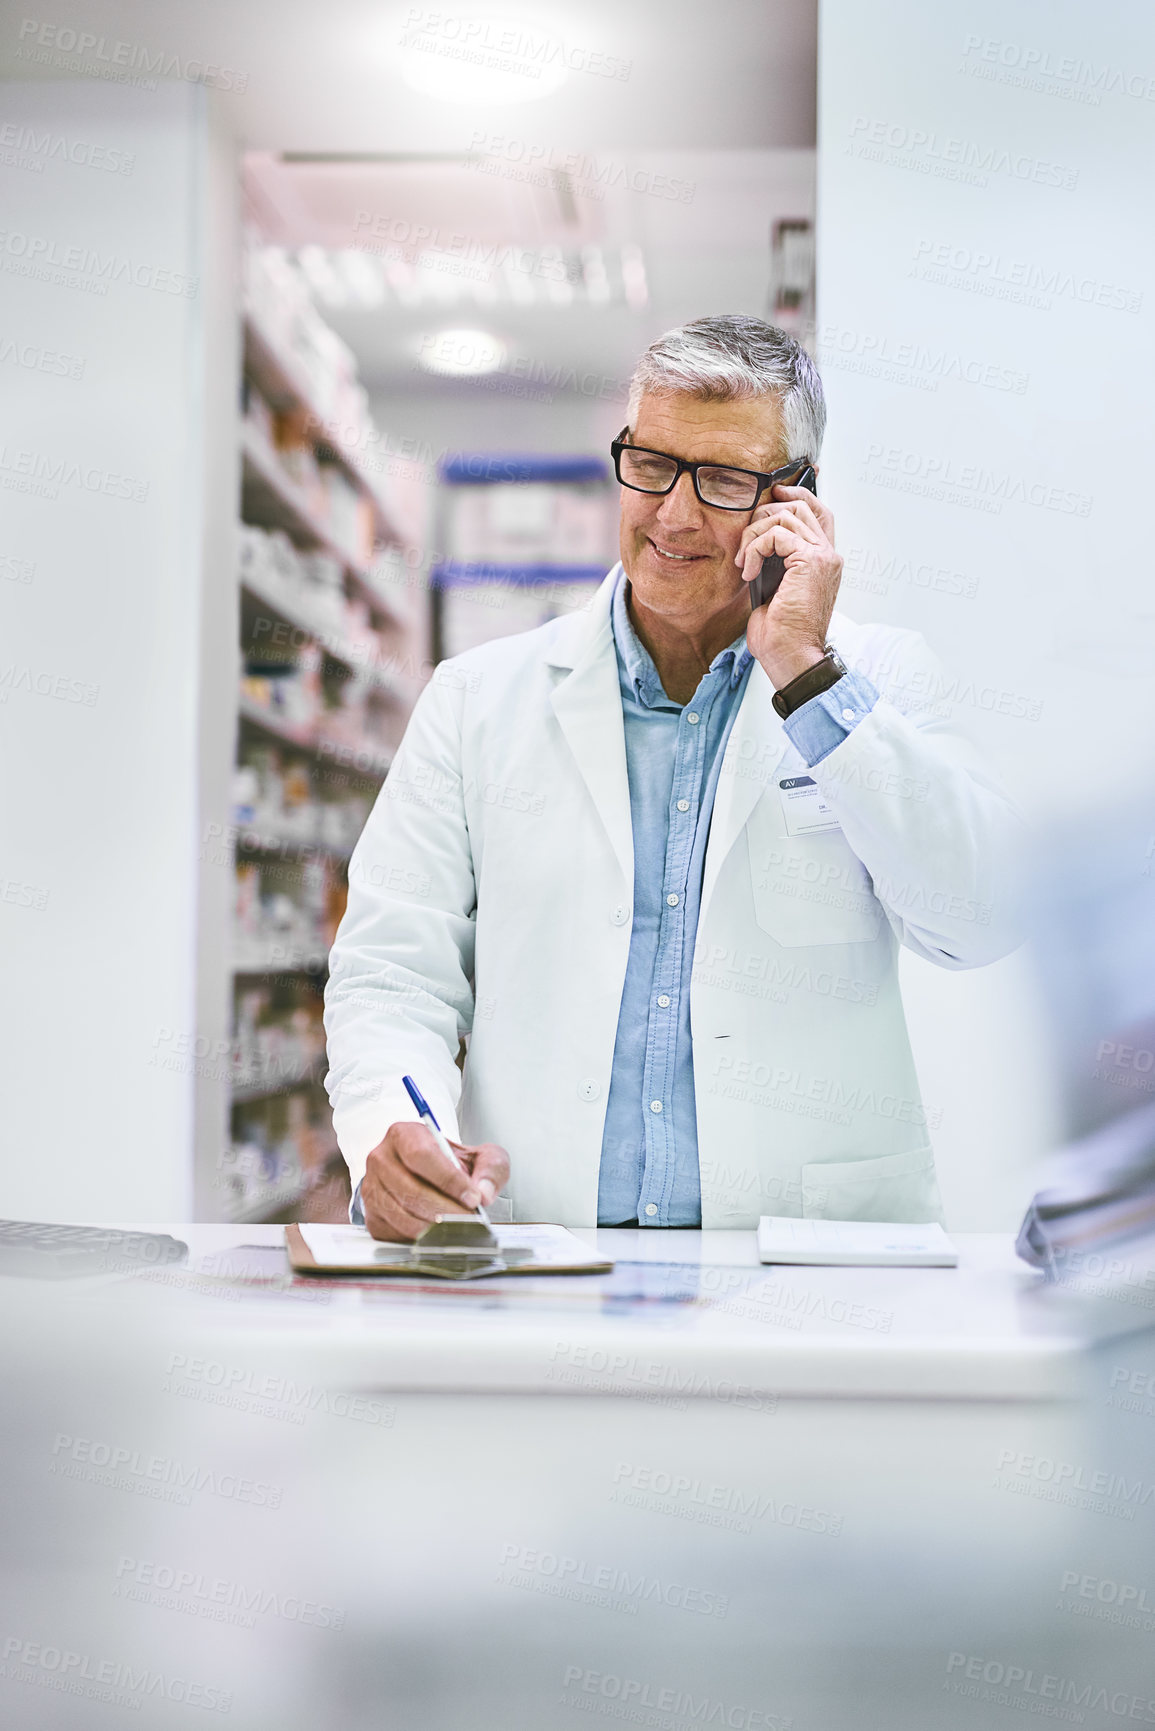 Buy stock photo Shot of a cheerful mature male pharmacist making notes while being on the phone in the pharmacy